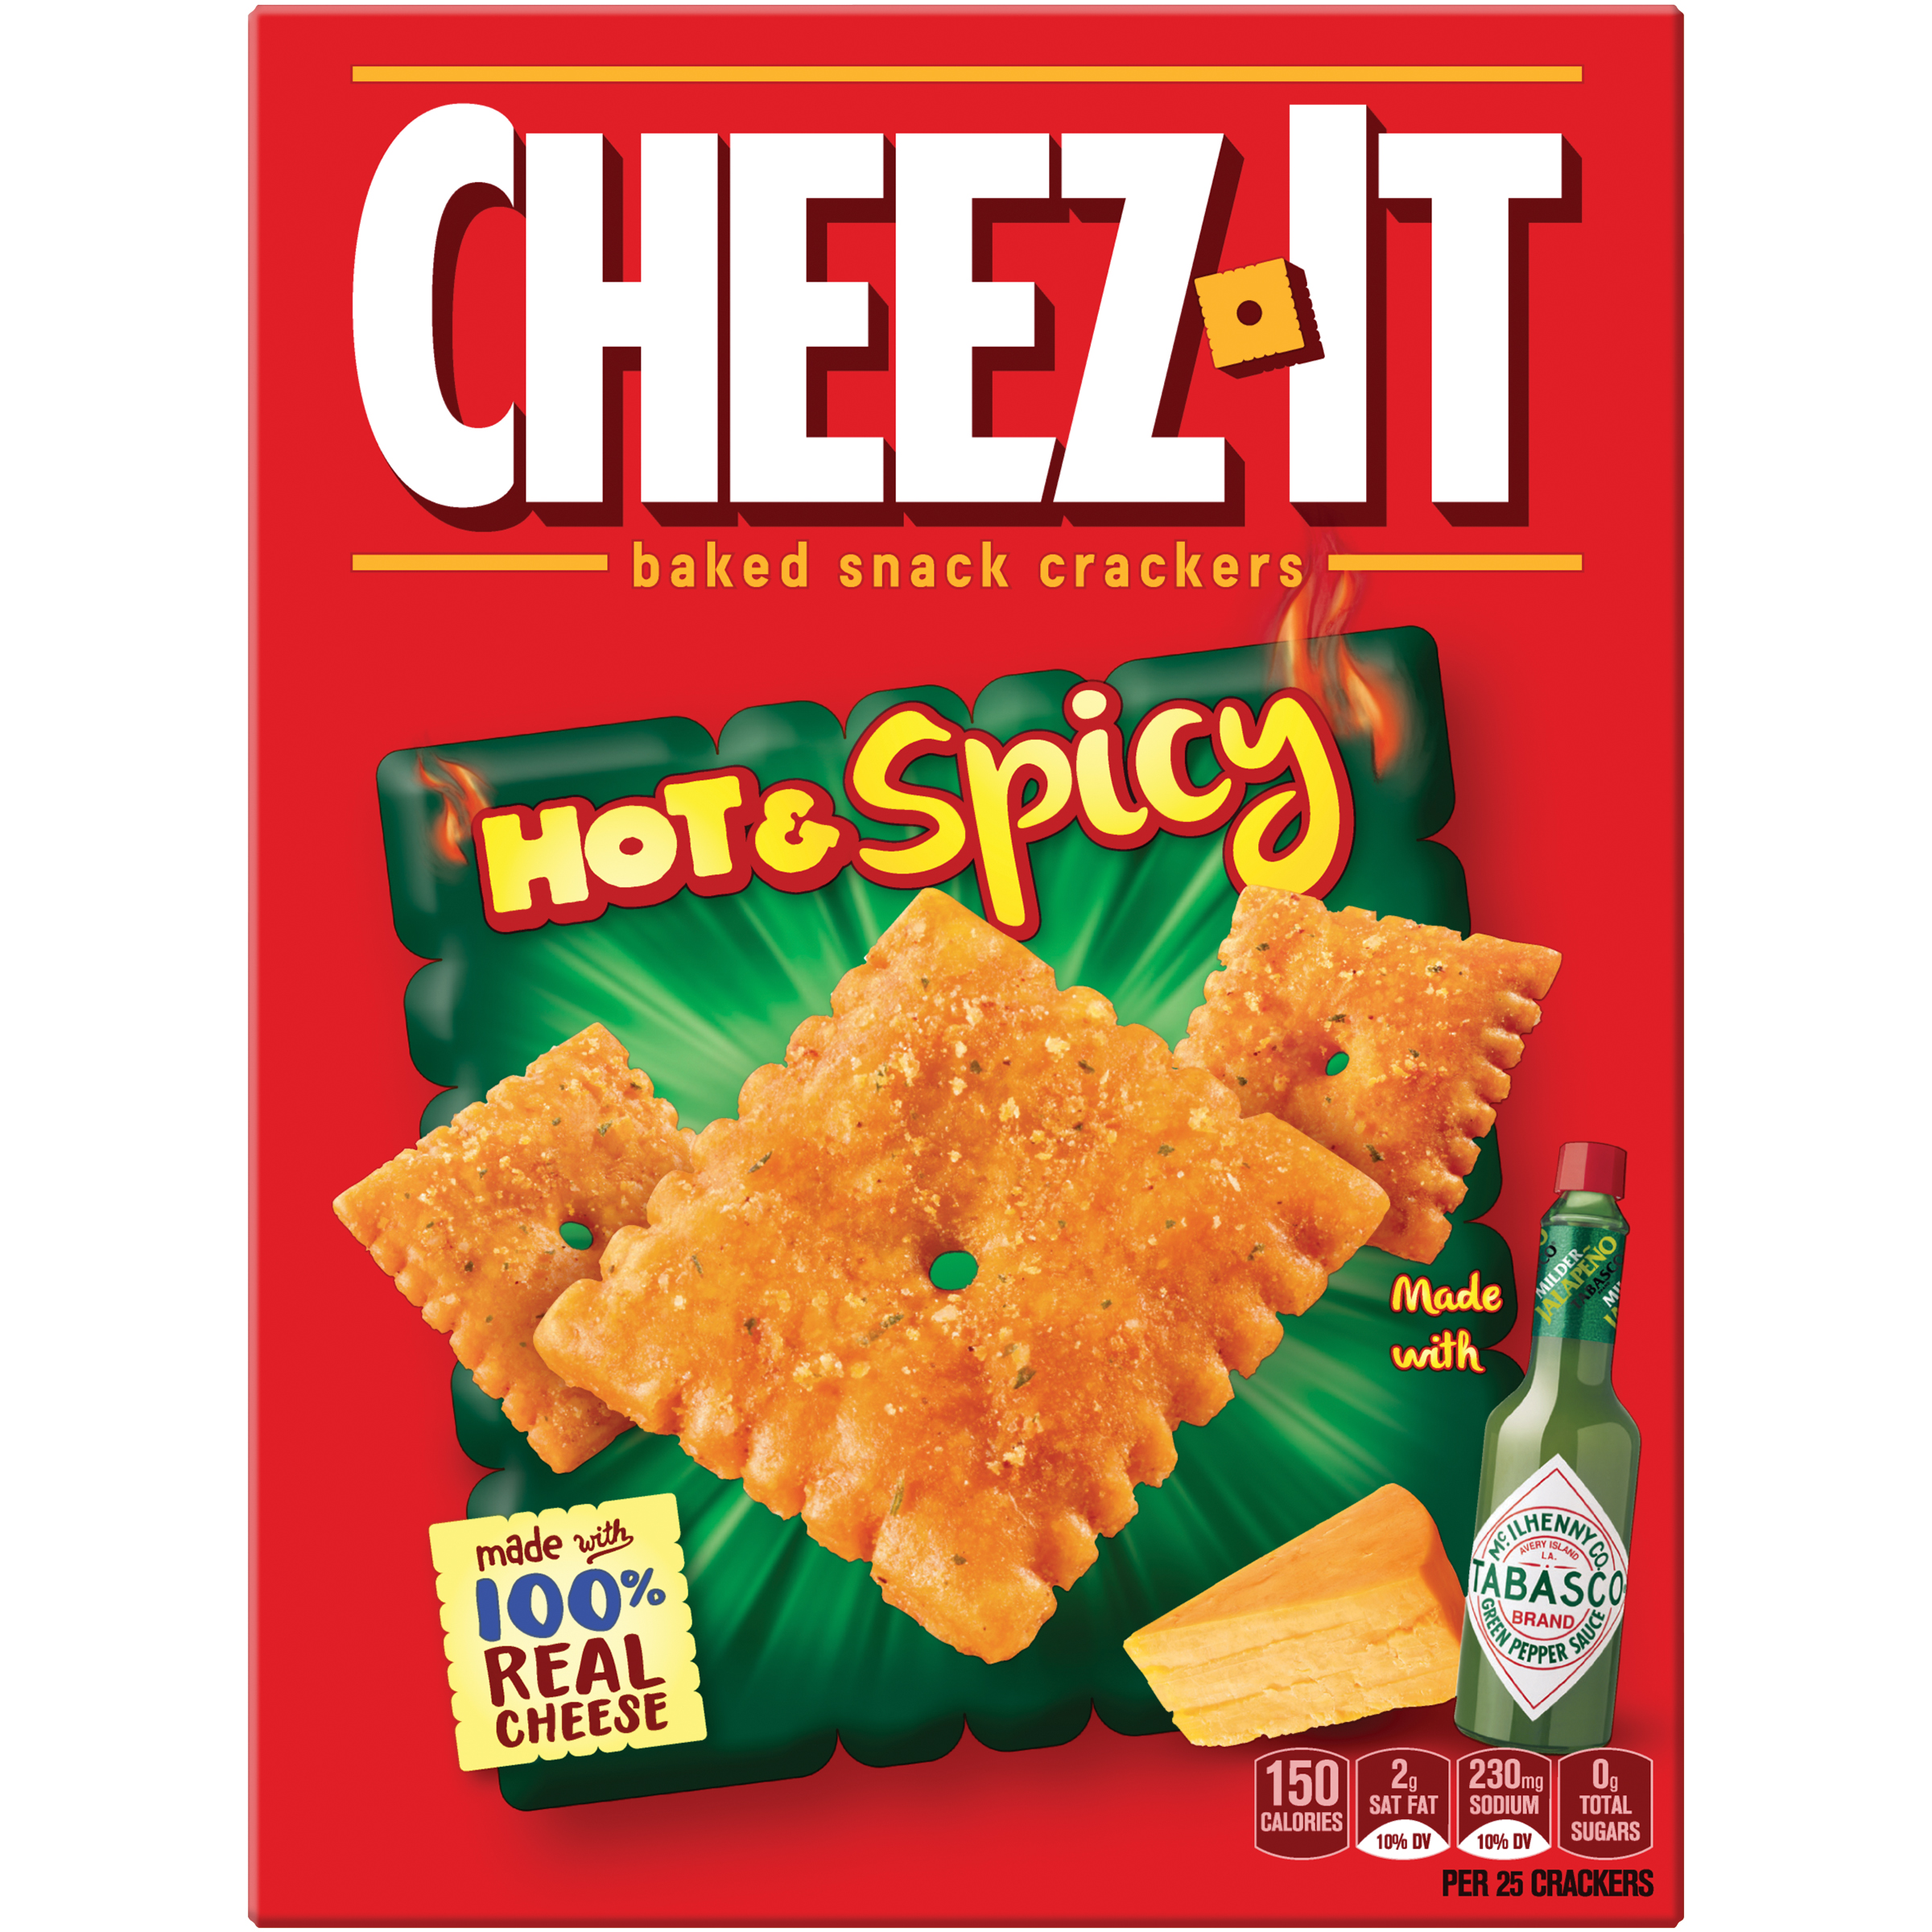 Cheez-it Hot & Spicy Baked Snack Crackers 12.4 oz. 